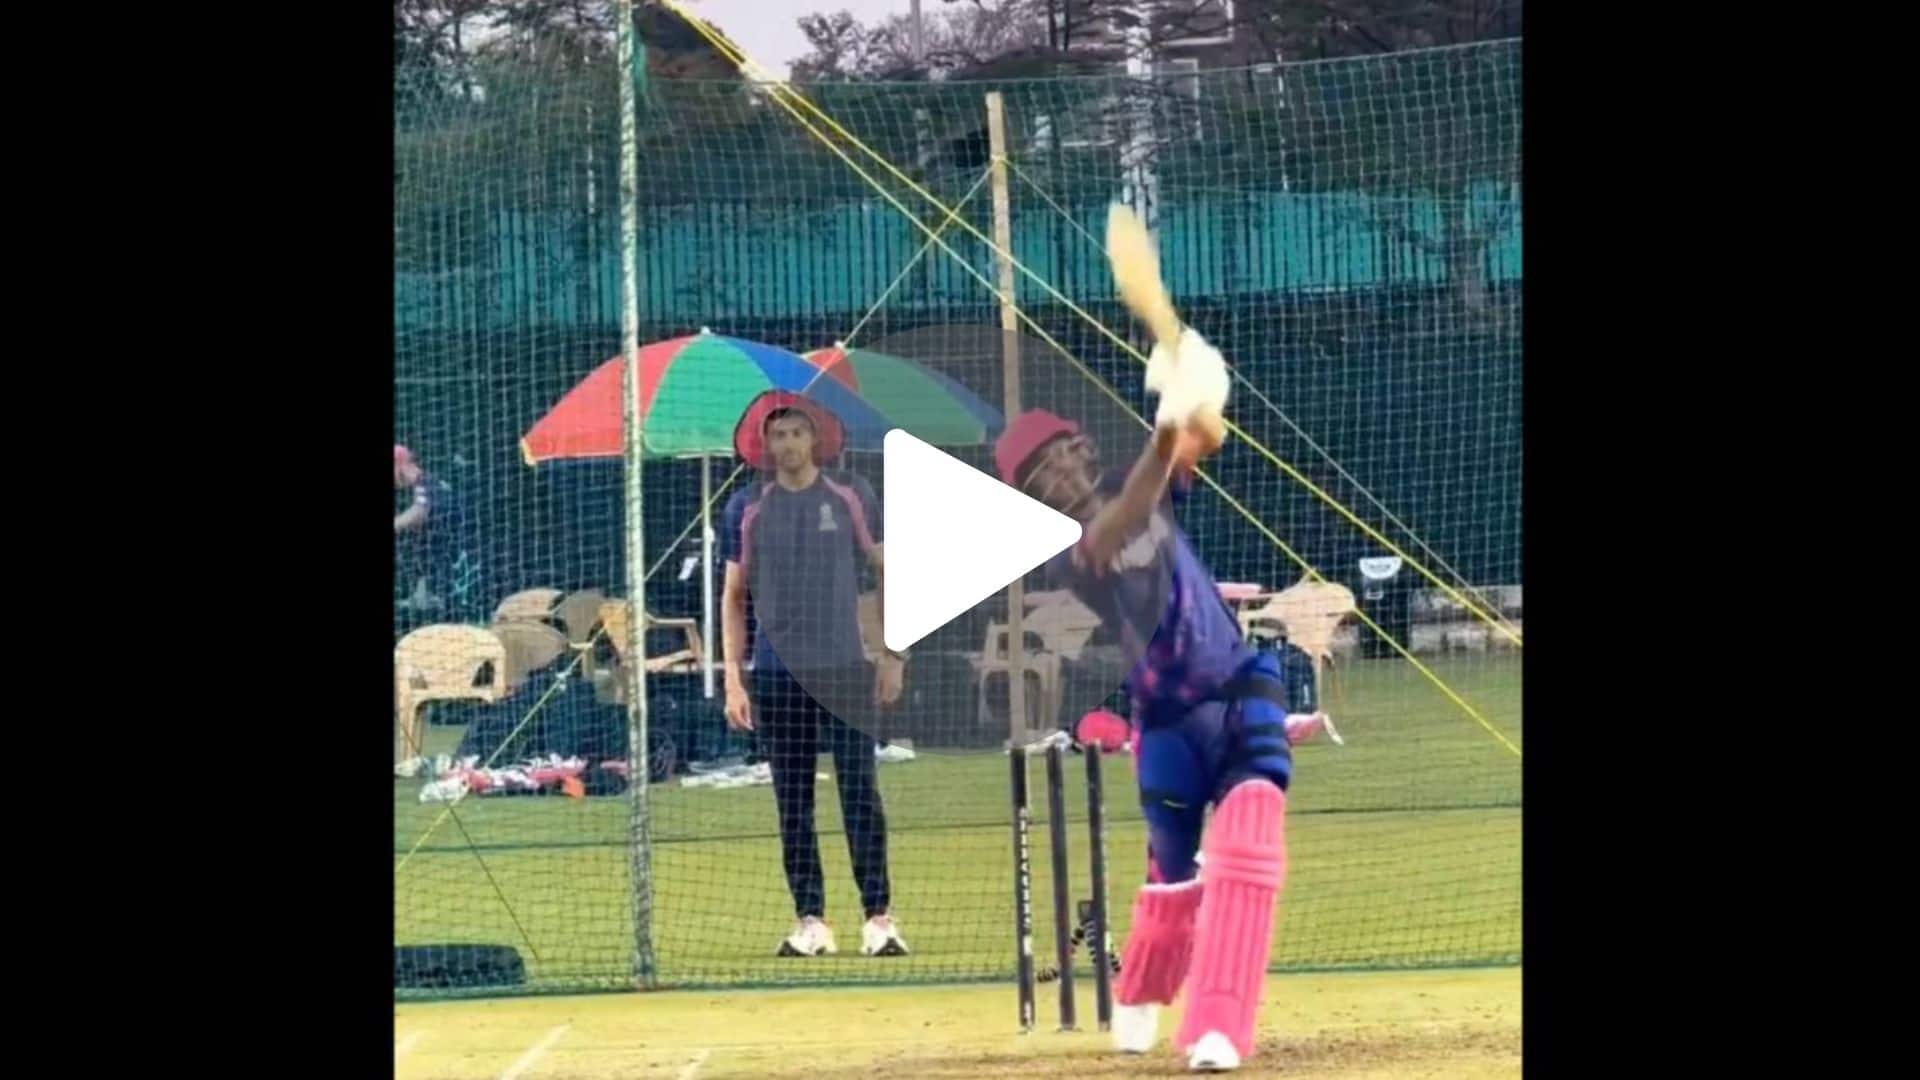 [Watch] Yuzvendra Chahal Displays 'Power' With Two Big Sixes In RR Training Session